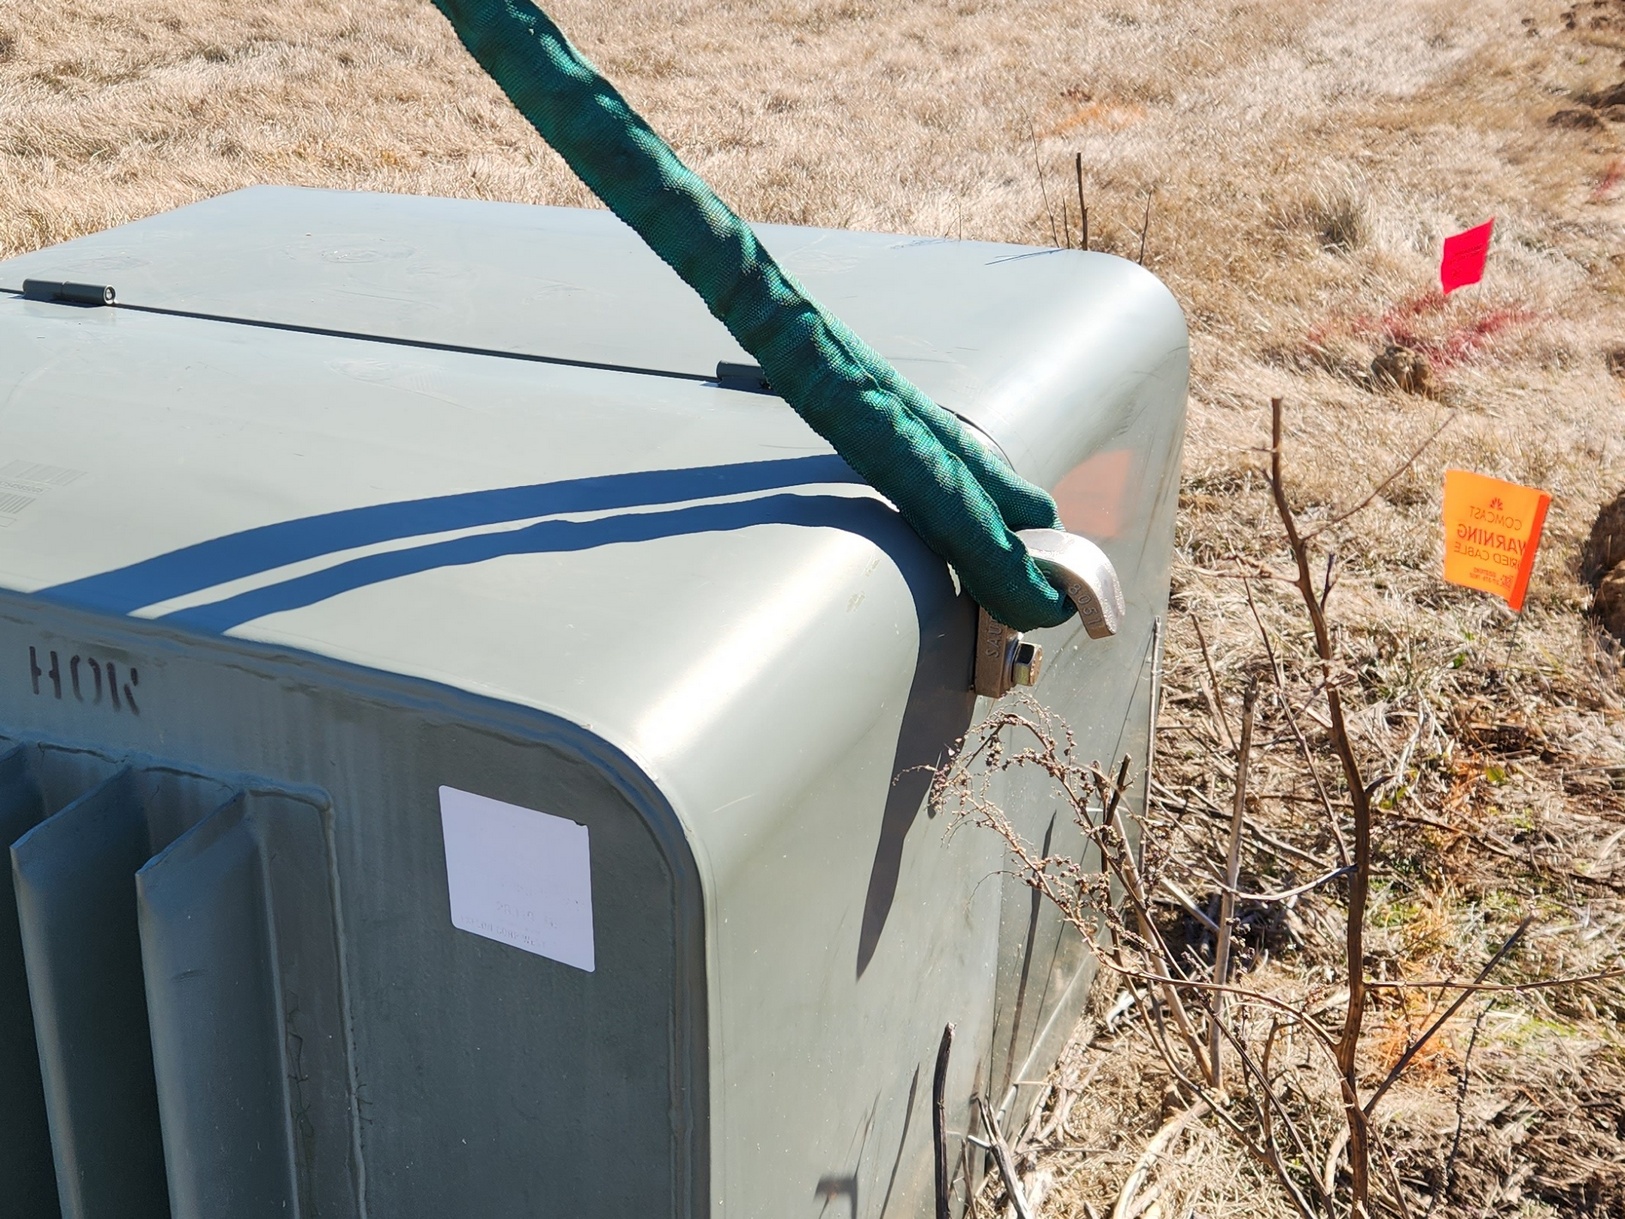 Image of Sauber Mfg. Co. Model 8051 Transformer Lifting Hook installed on green underground transformer with lifting strap. Shown at a construction area with brown vegitation.